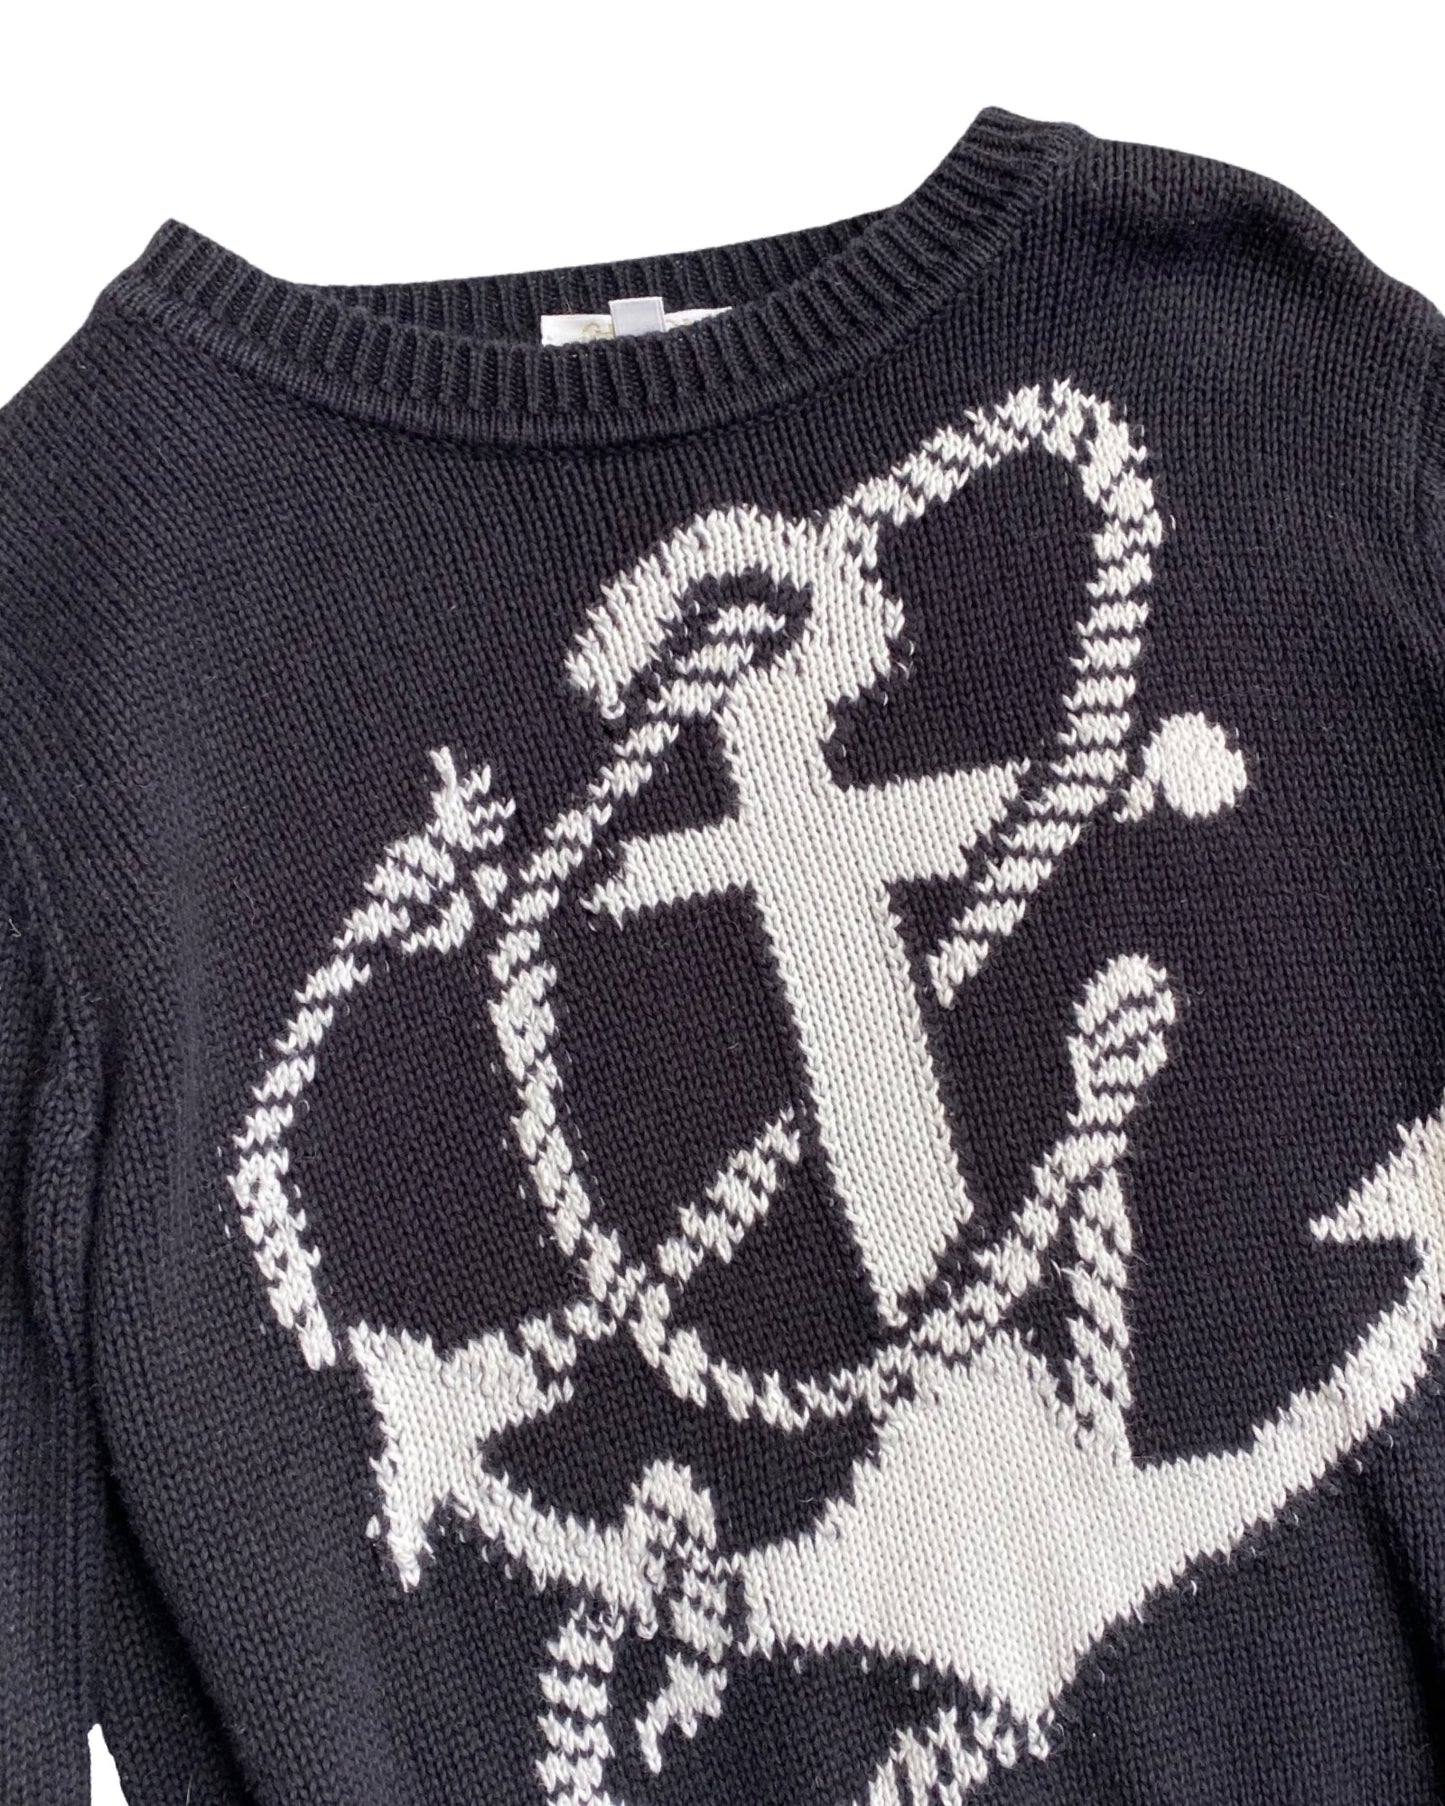 Gucci Anchor navy knitted jumper (3-4years)